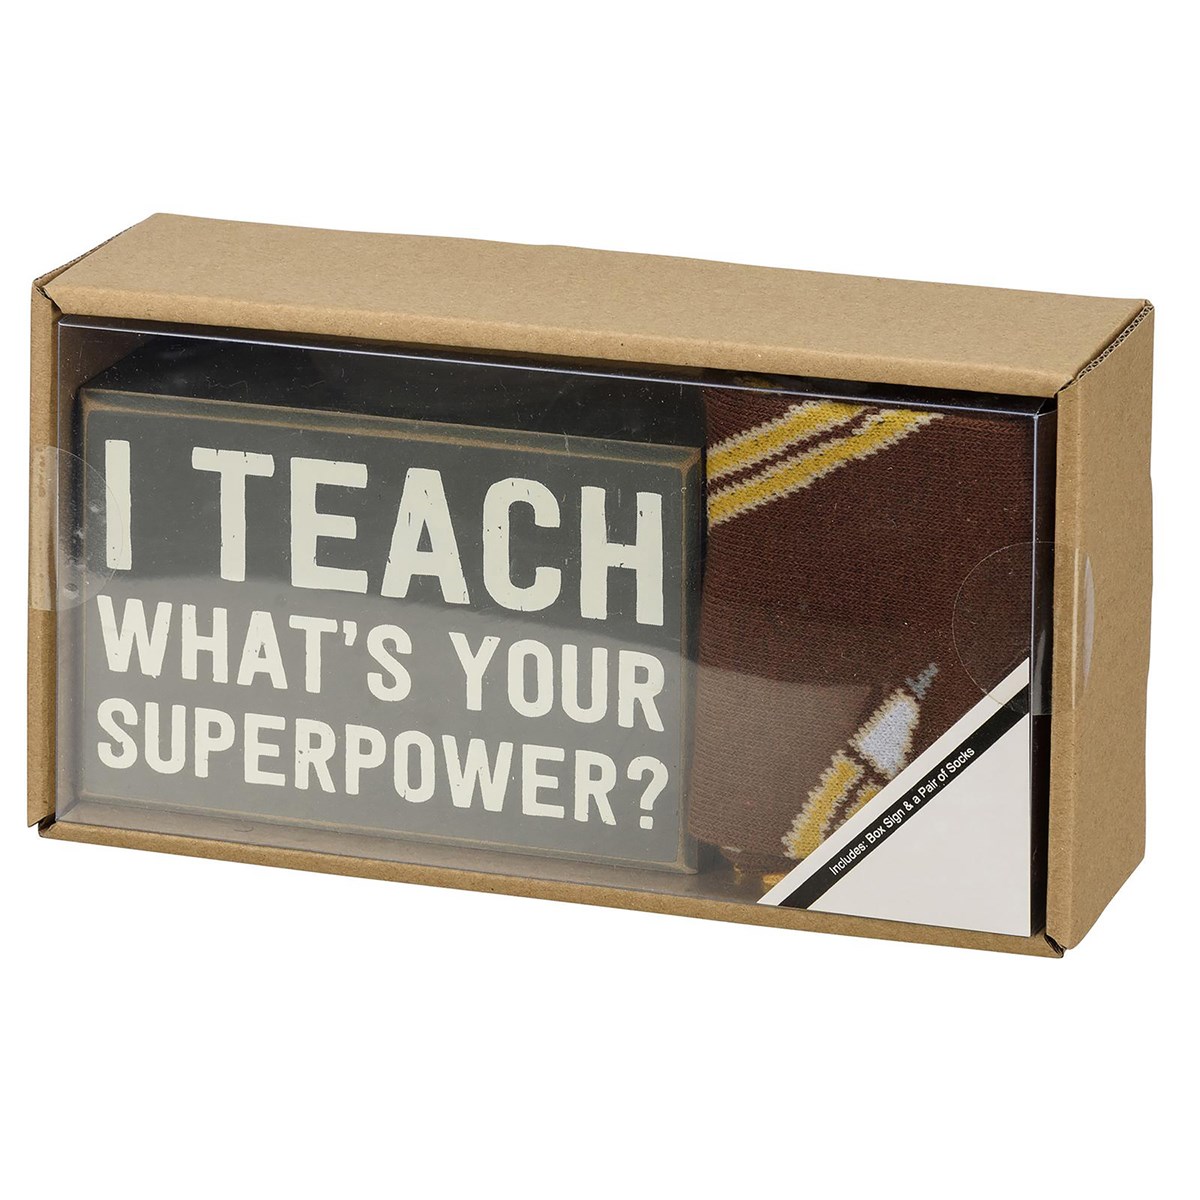 I Teach Your Superpower? Box Sign And Sock Set - Wood, Cotton, Nylon, Spandex